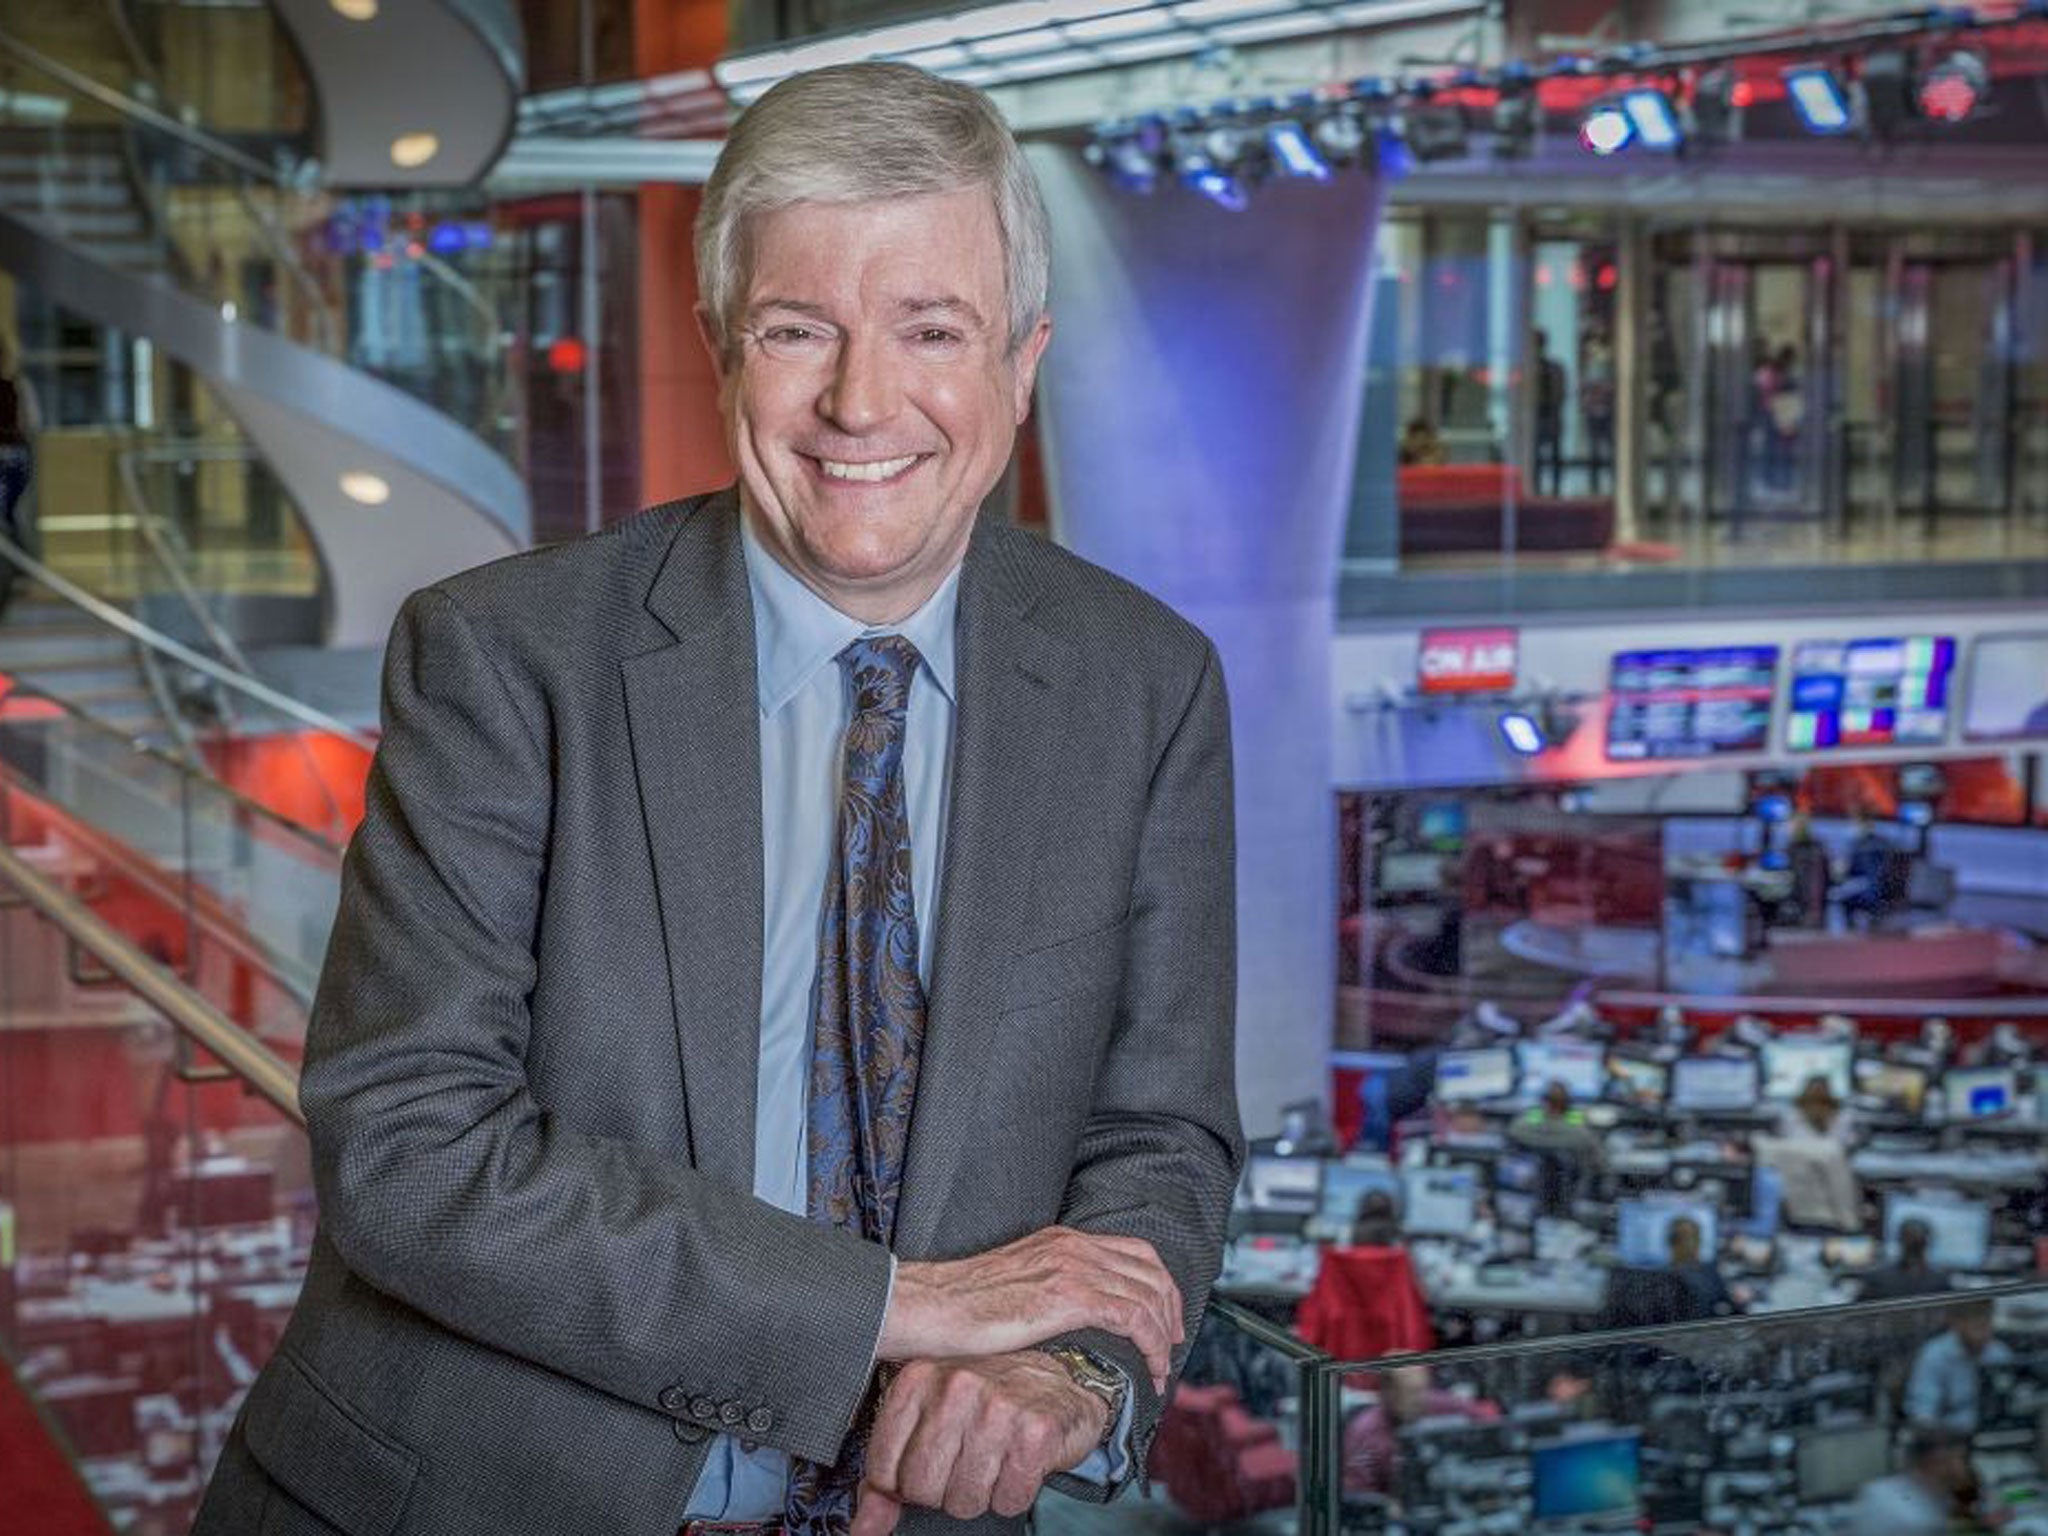 Lord Hall’s plans for a ‘personal’ BBC might not suit everyone